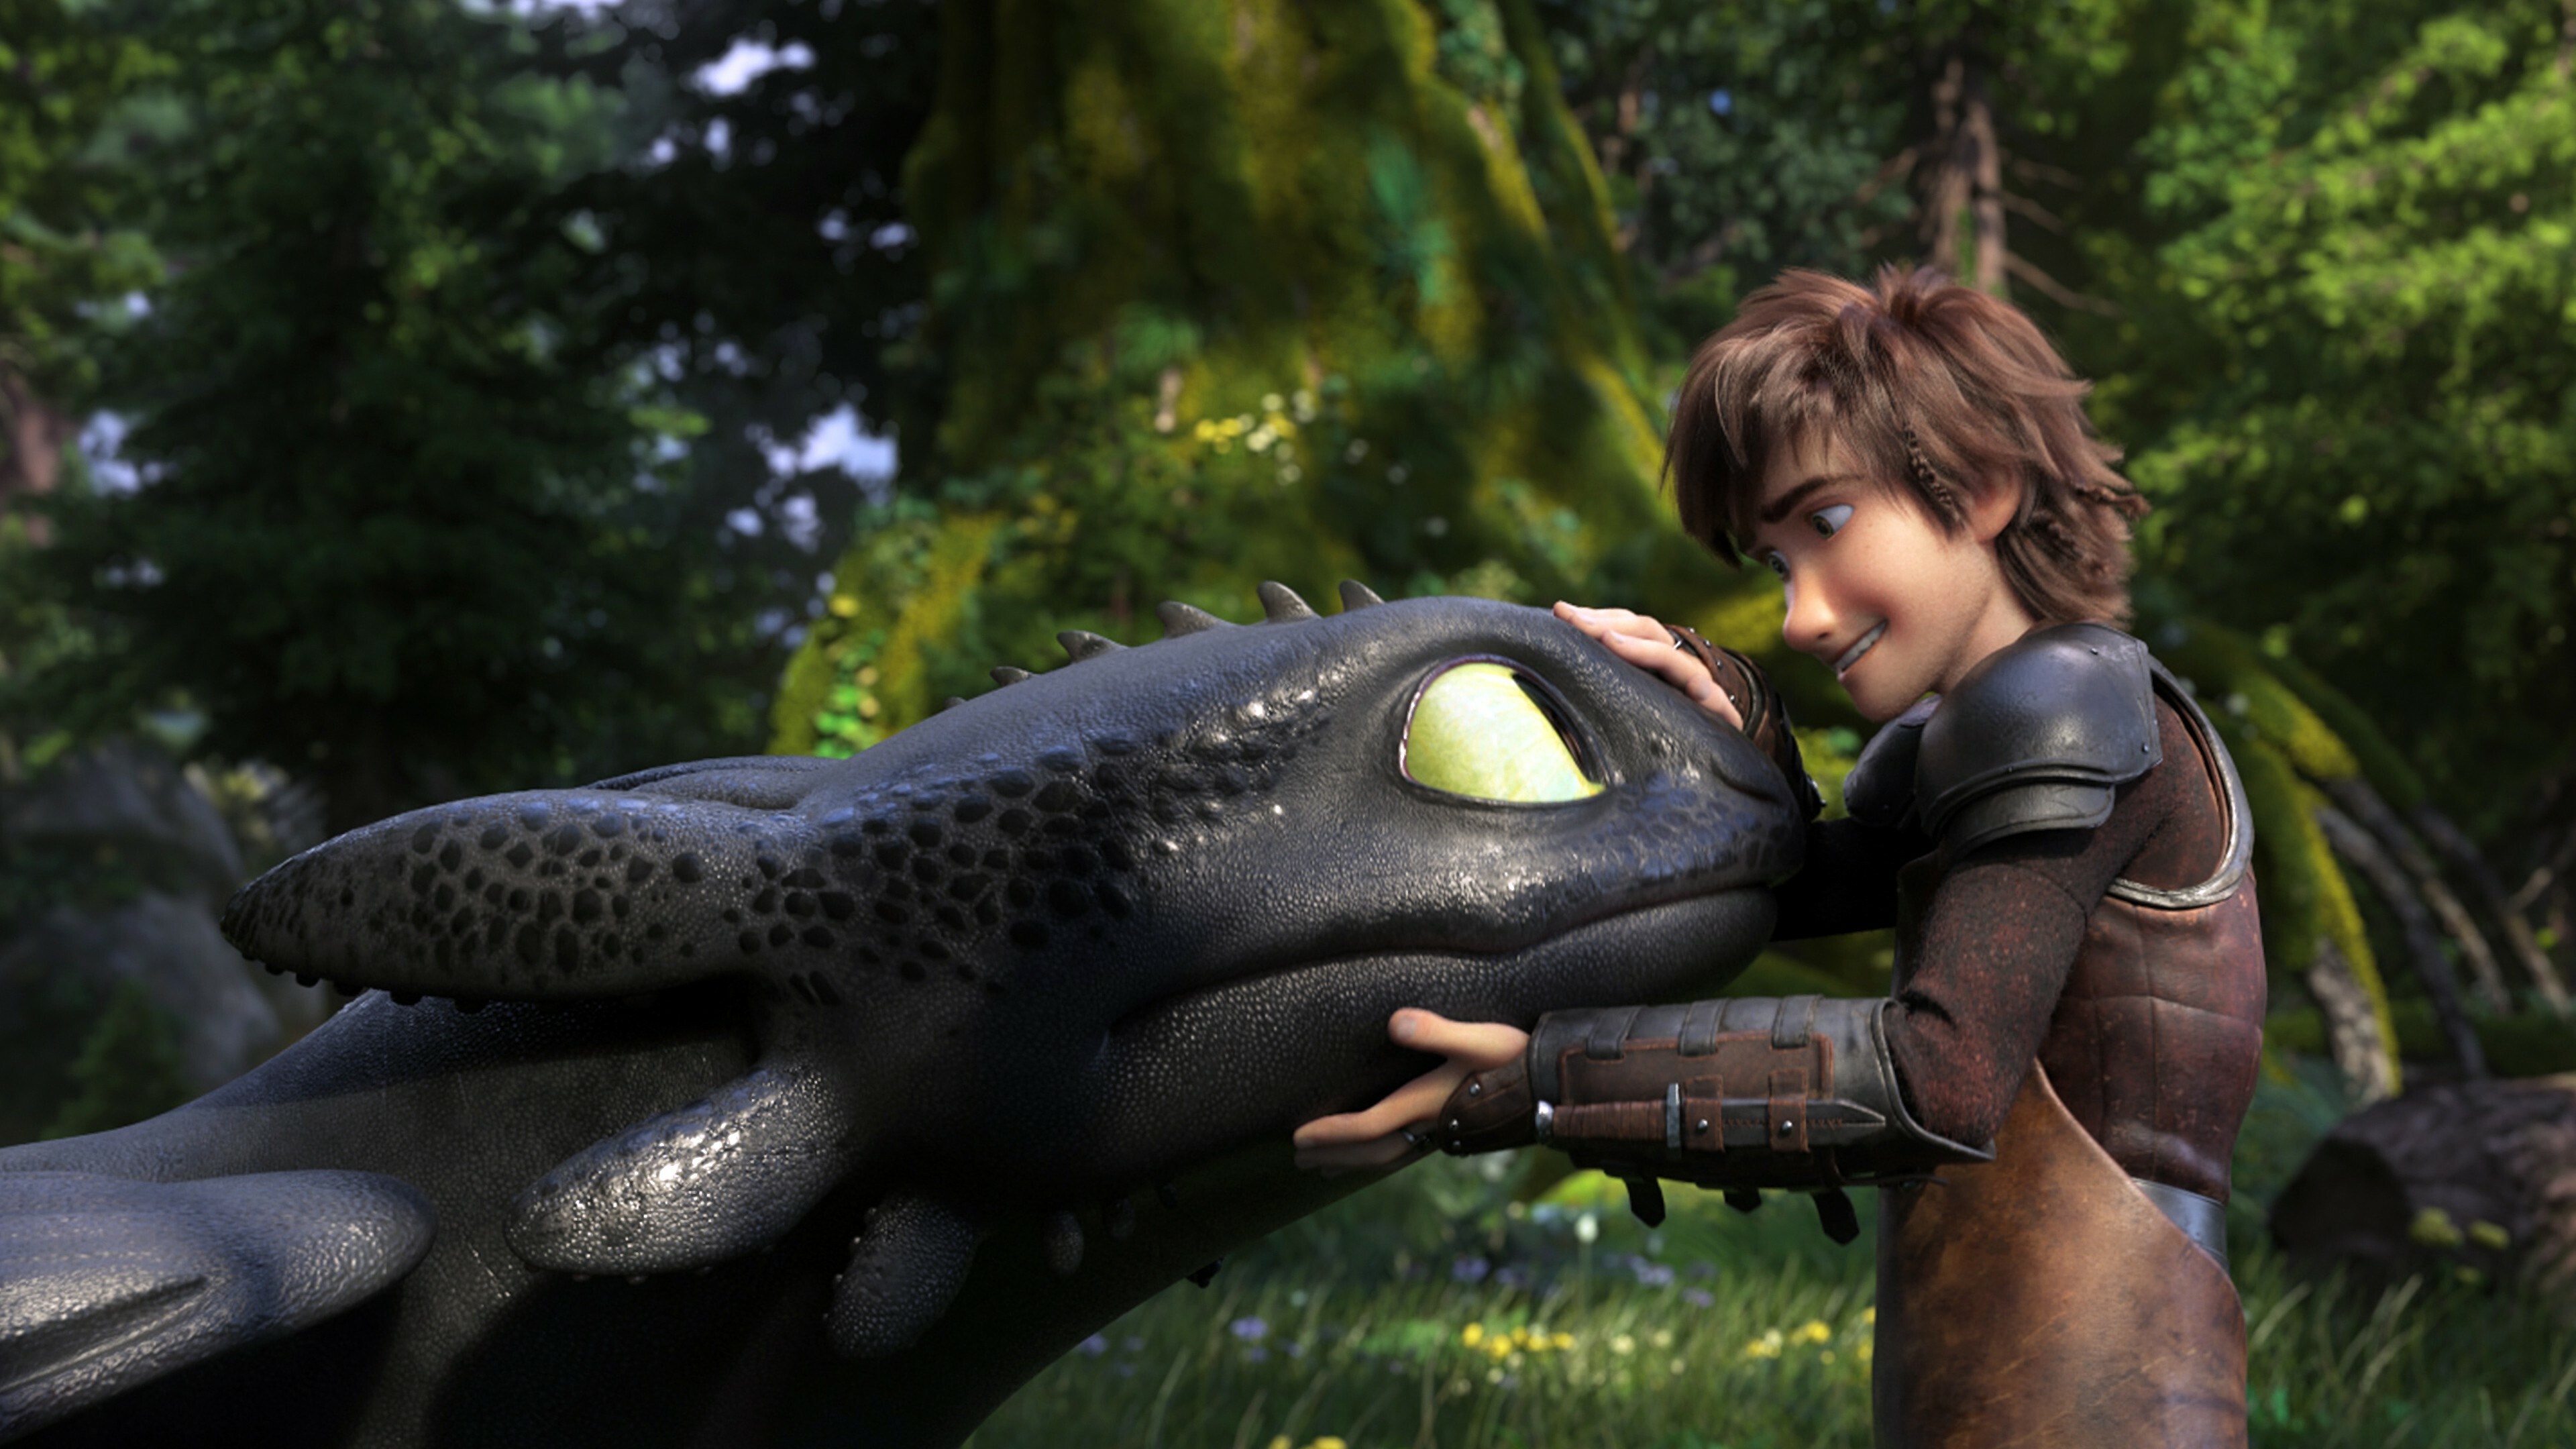 How to Train Your Dragon: Hiccup Horrendous Haddock III, The awkward son of Stoick the Vast. 3840x2160 4K Background.